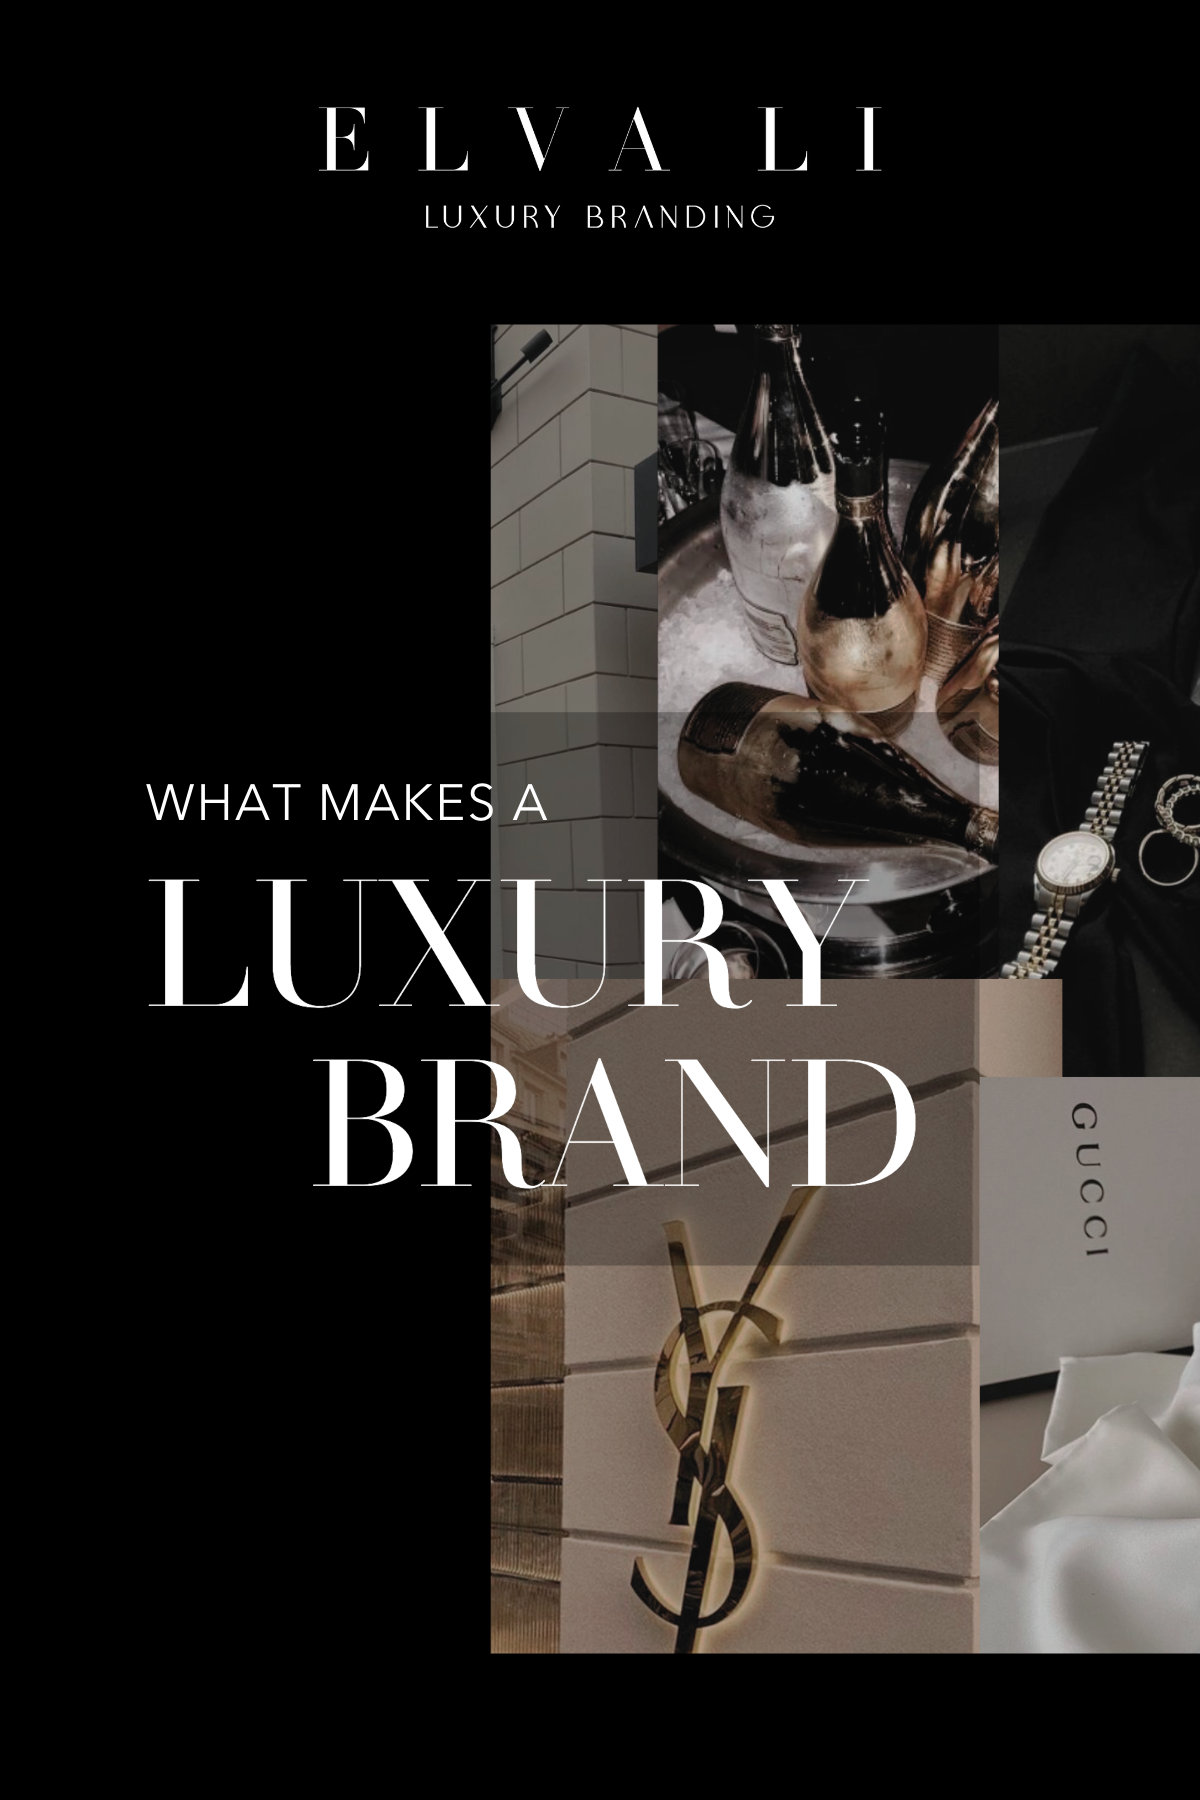 Which Are the Most Valuable Luxury Fashion Brands? - Attire Club by Fraquoh  and Franchomme